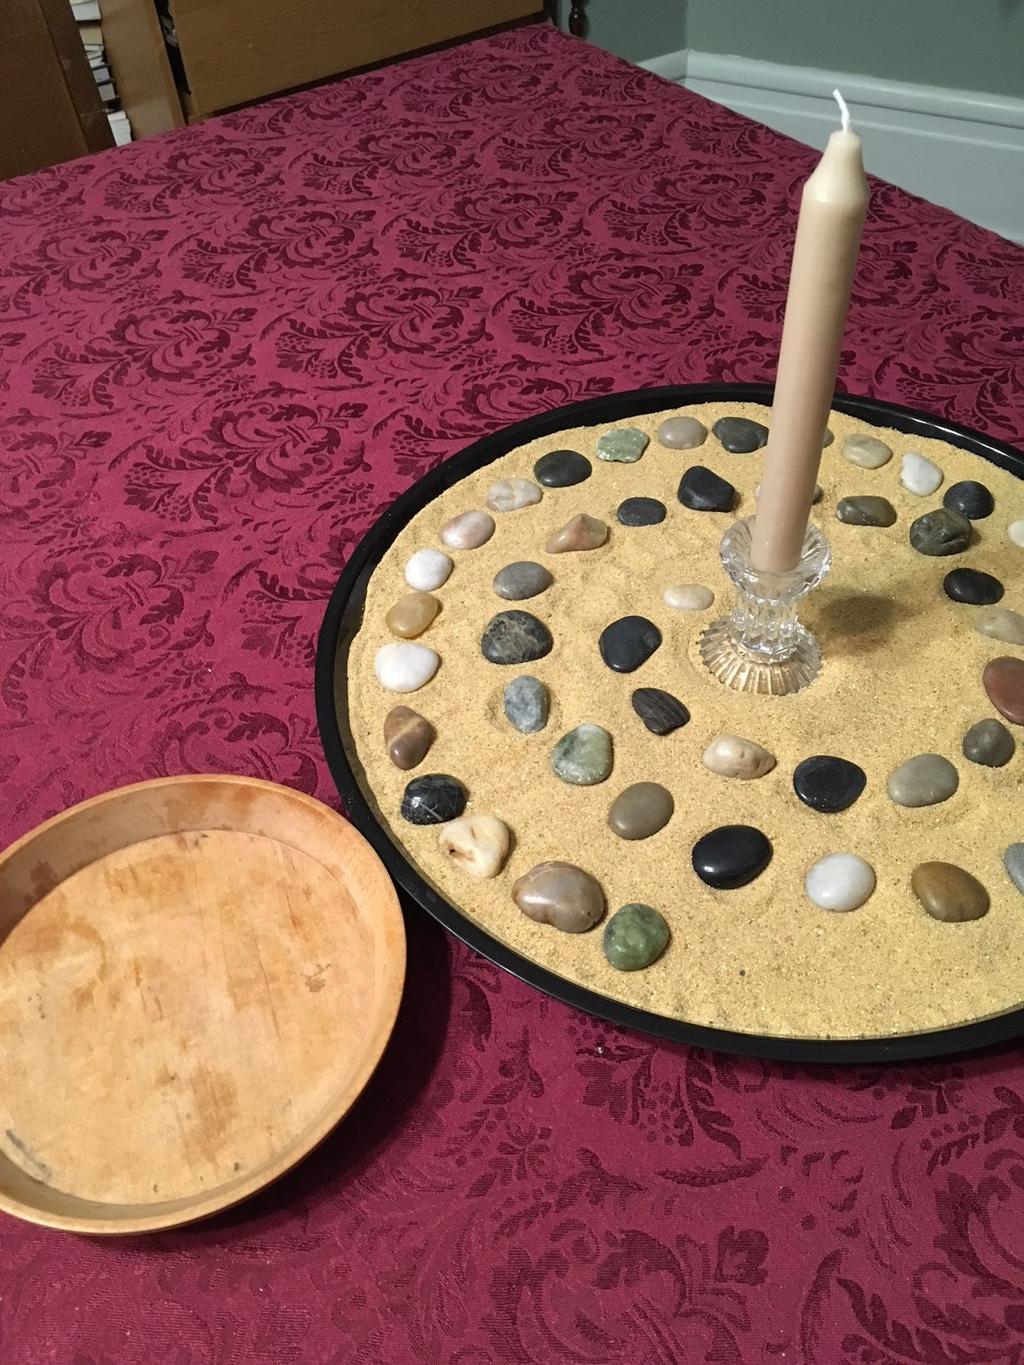 COUNTDOWN TO PASCHA IDEAS 1 -- A Path to Pascha : In keeping with the theme of tending the garden, consider creating a sand garden with rock stepping stones, one for each day of Lent and Holy Week,